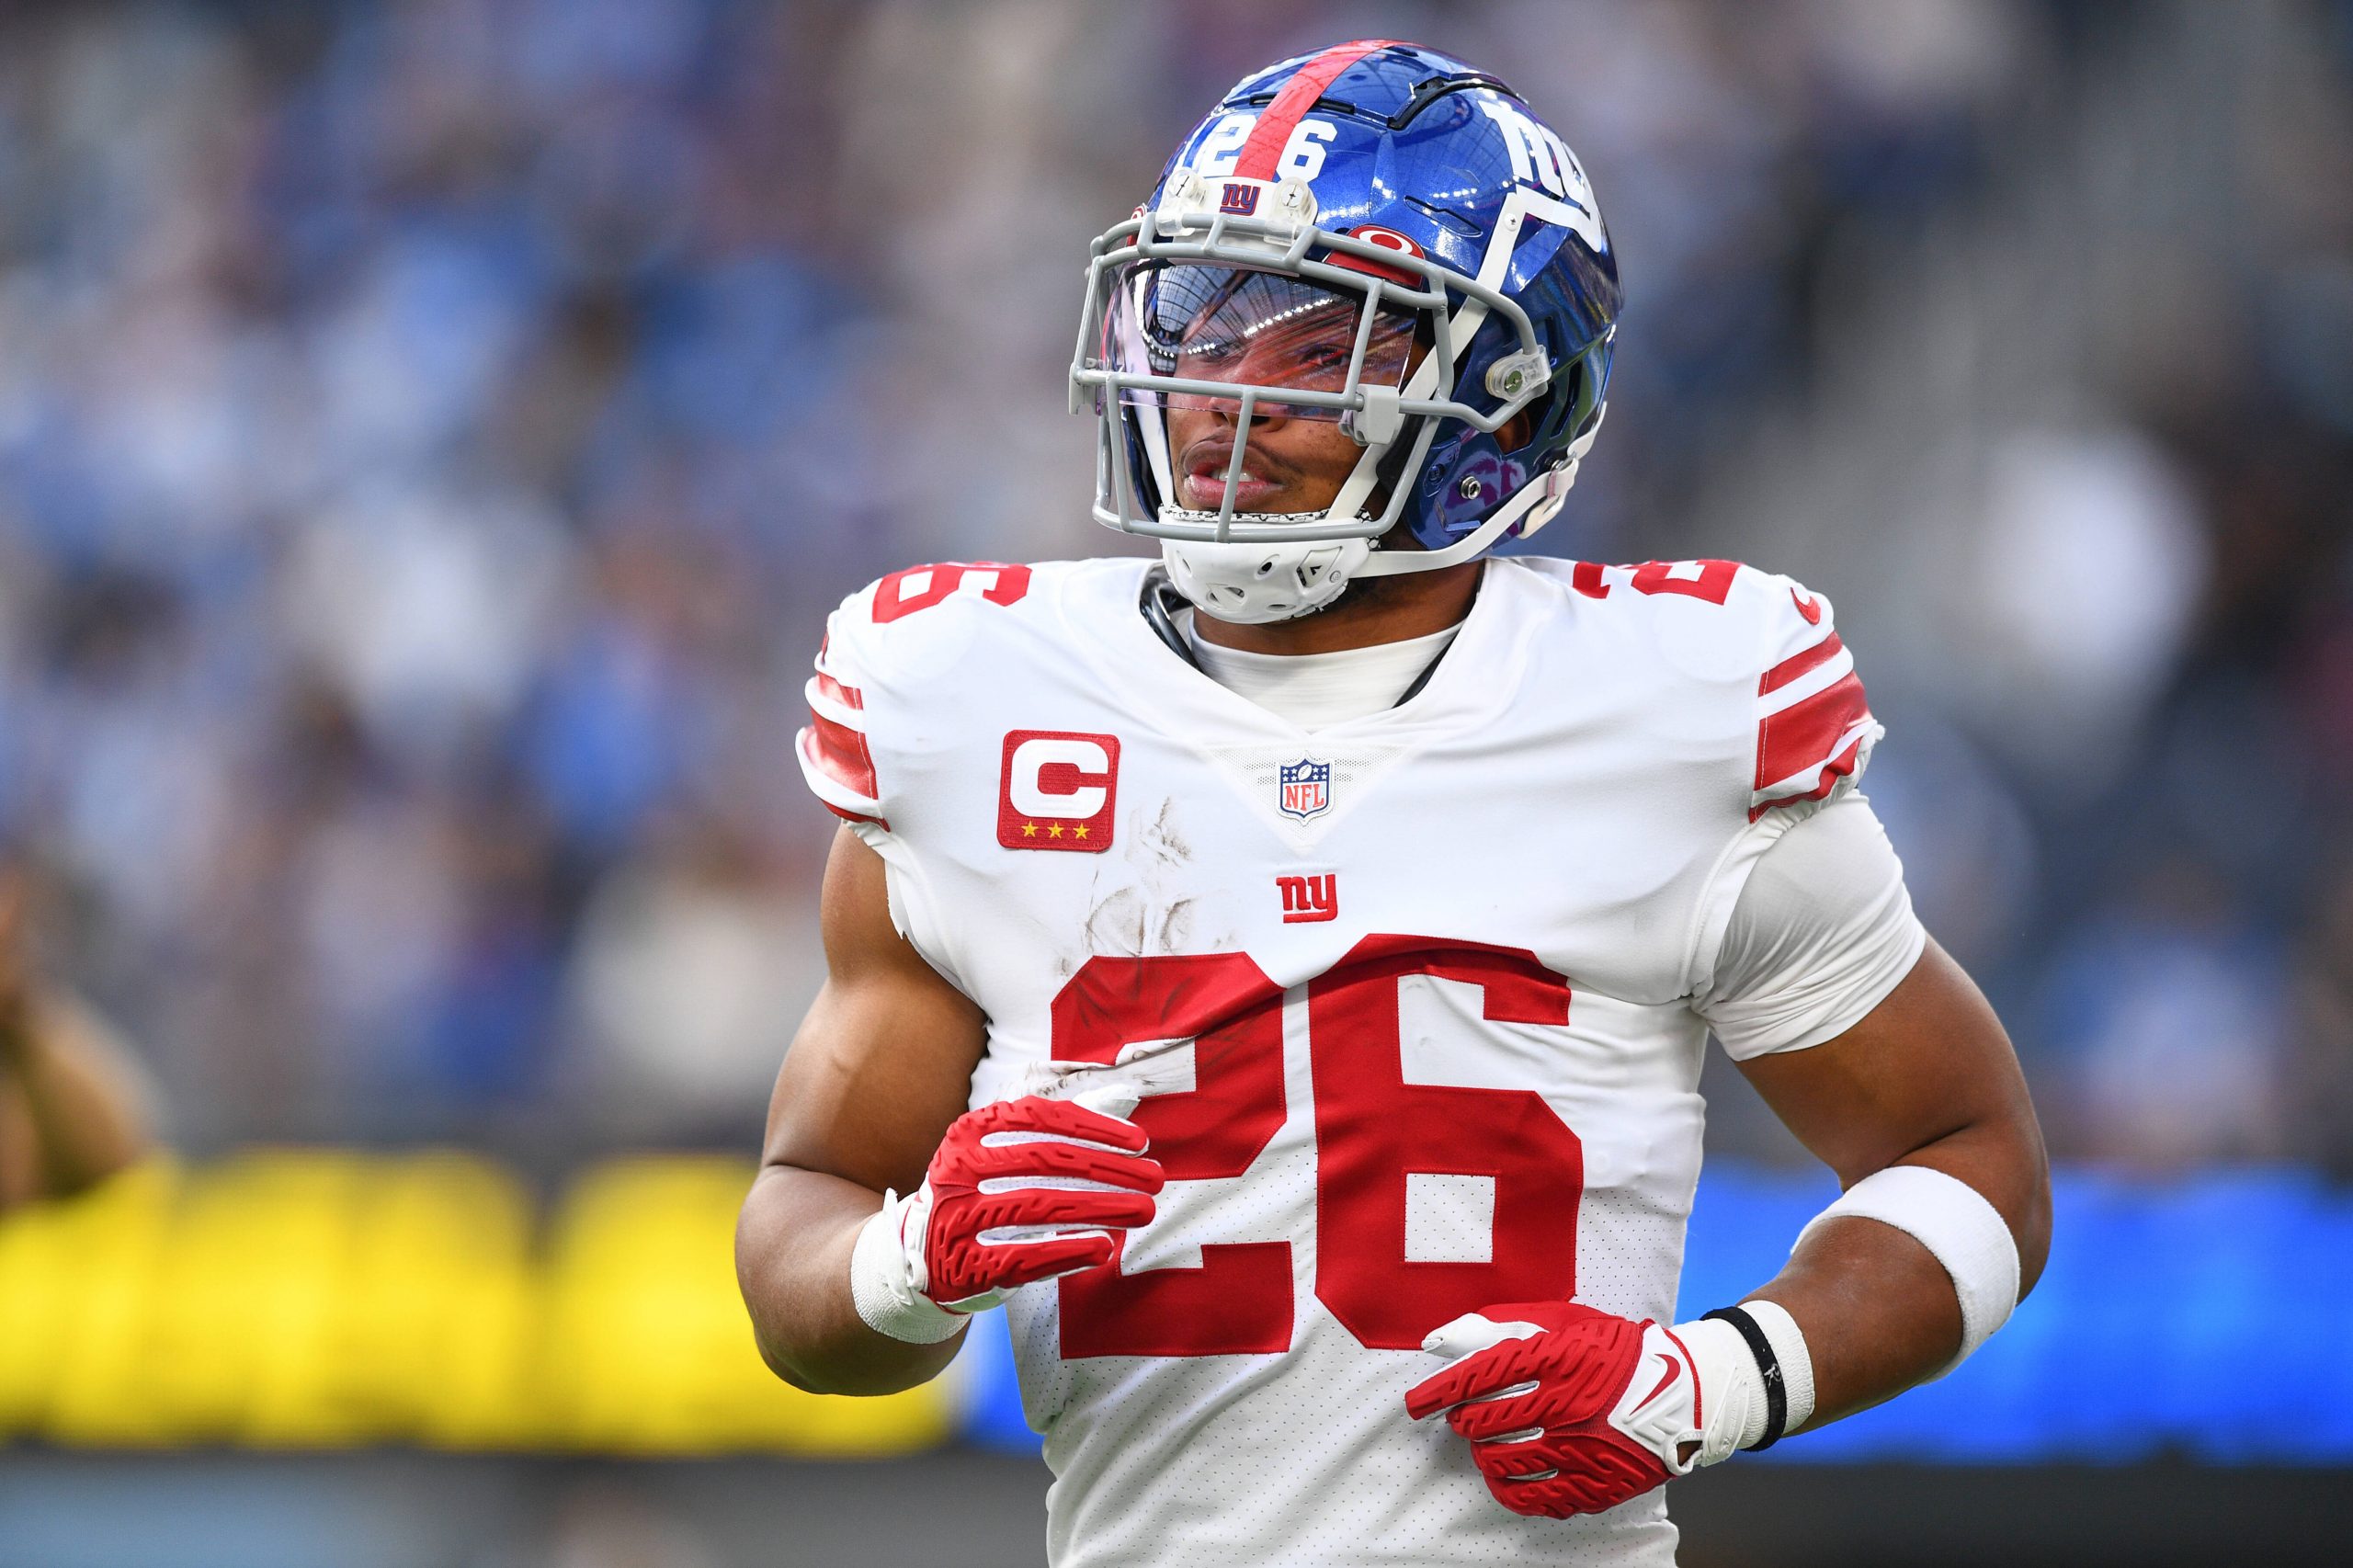 INGLEWOOD, CA - DECEMBER 12: New York Giants Running Back Saquon Barkley 26 looks on during the NFL, American Football Herren, USA game between the New York Giants and the Los Angeles Chargers on December 12, 2021, at SoFi Stadium in Inglewood, CA. Photo by Brian Rothmuller/Icon Sportswire NFL: DEC 12 Giants at Chargers Icon211212098